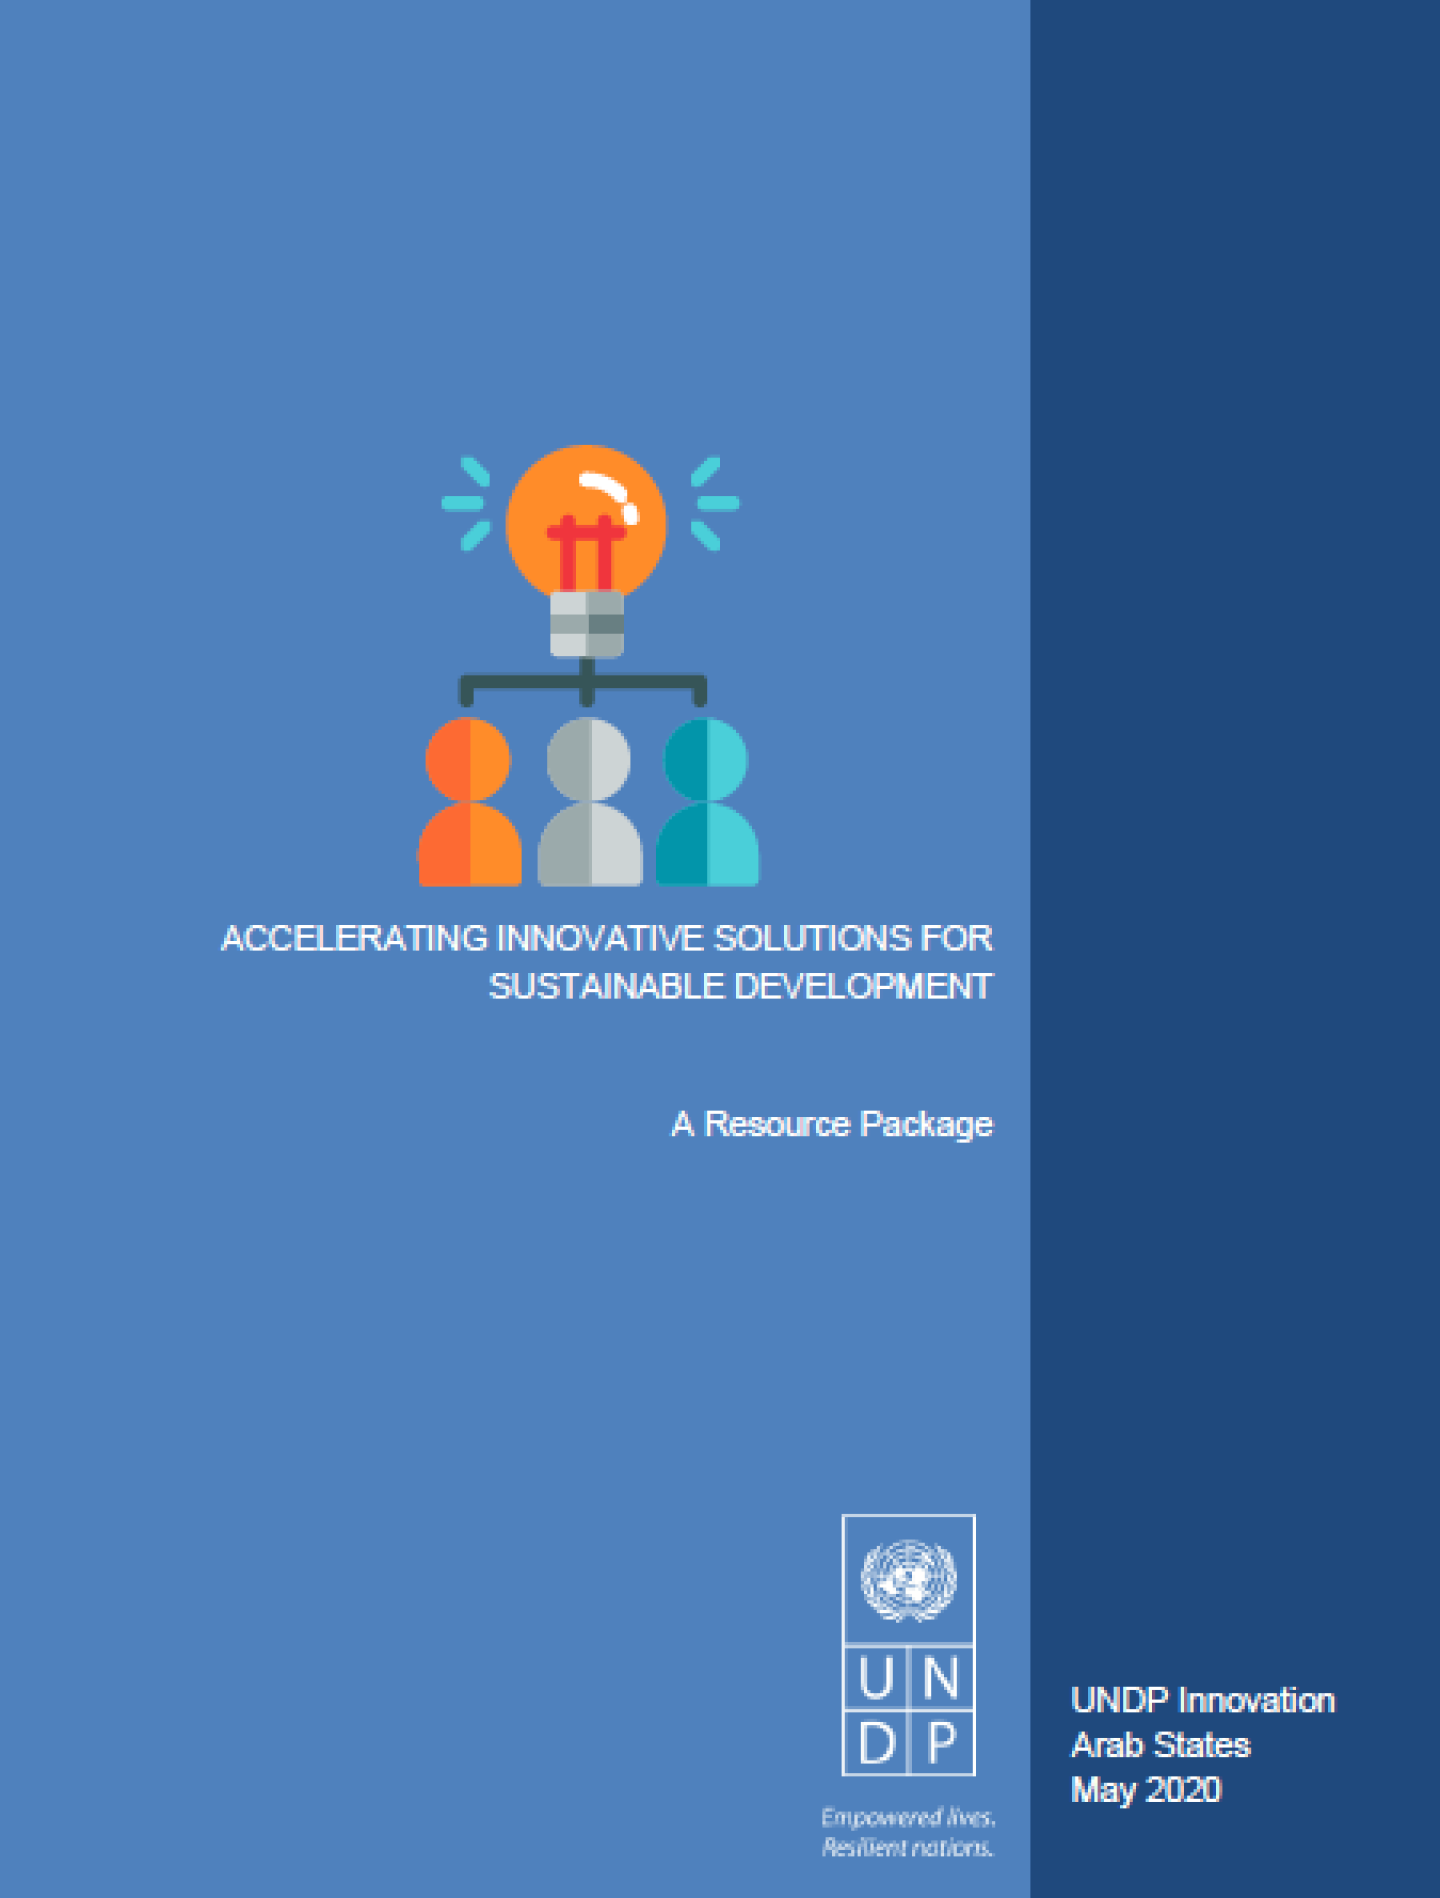 Accelerating innovative solutions for sustainable development | UNDP in the Arab States